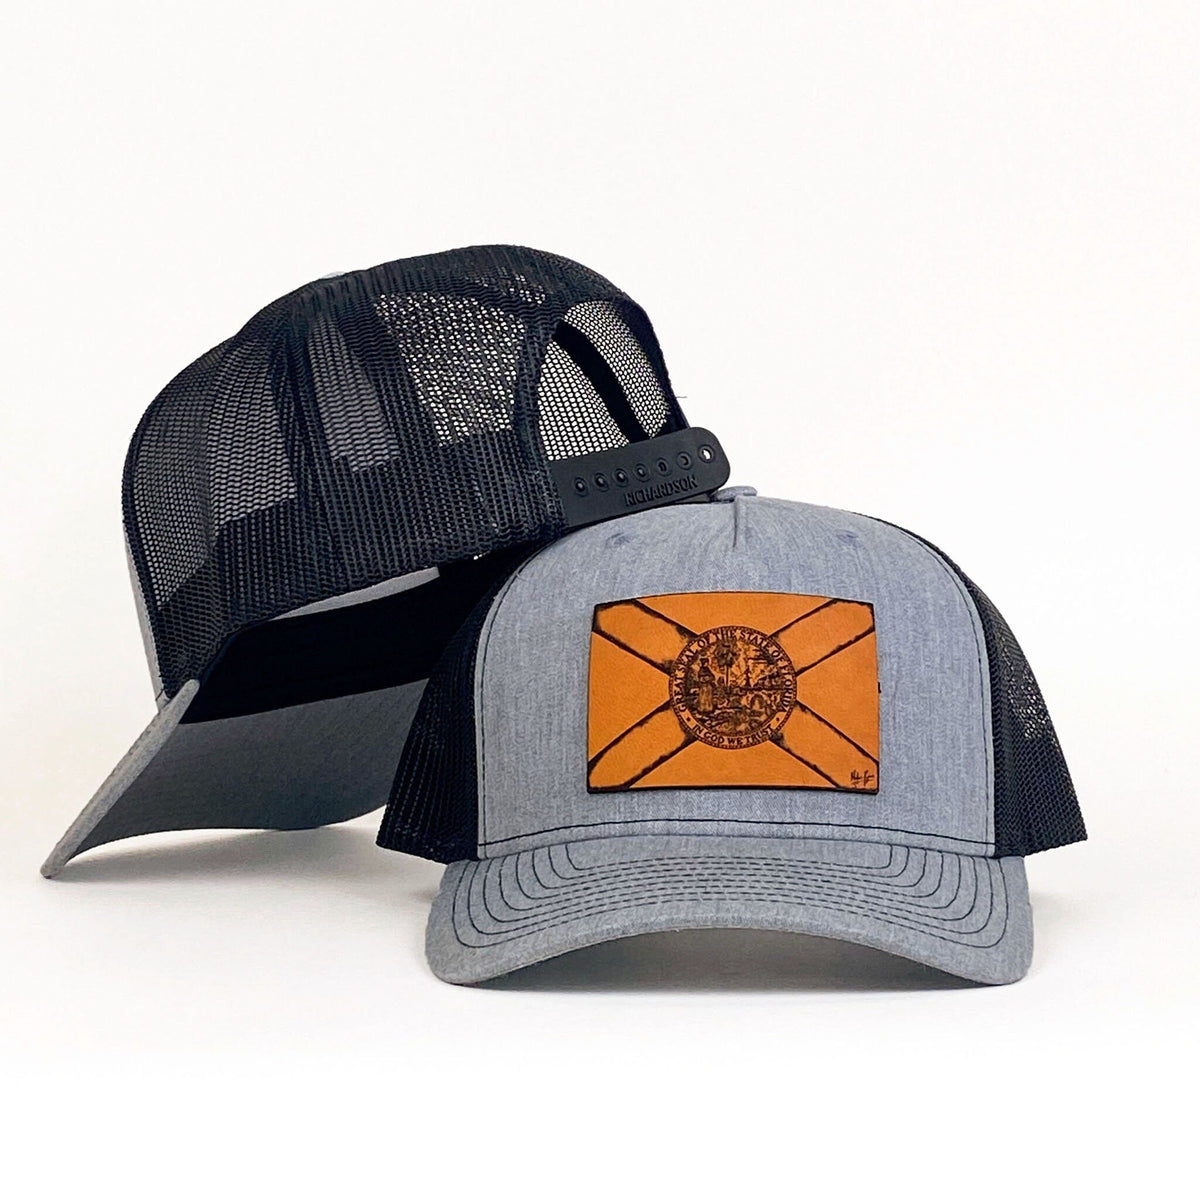 Florida Flag Trucker Hat - Mid Profile + Classic Patch